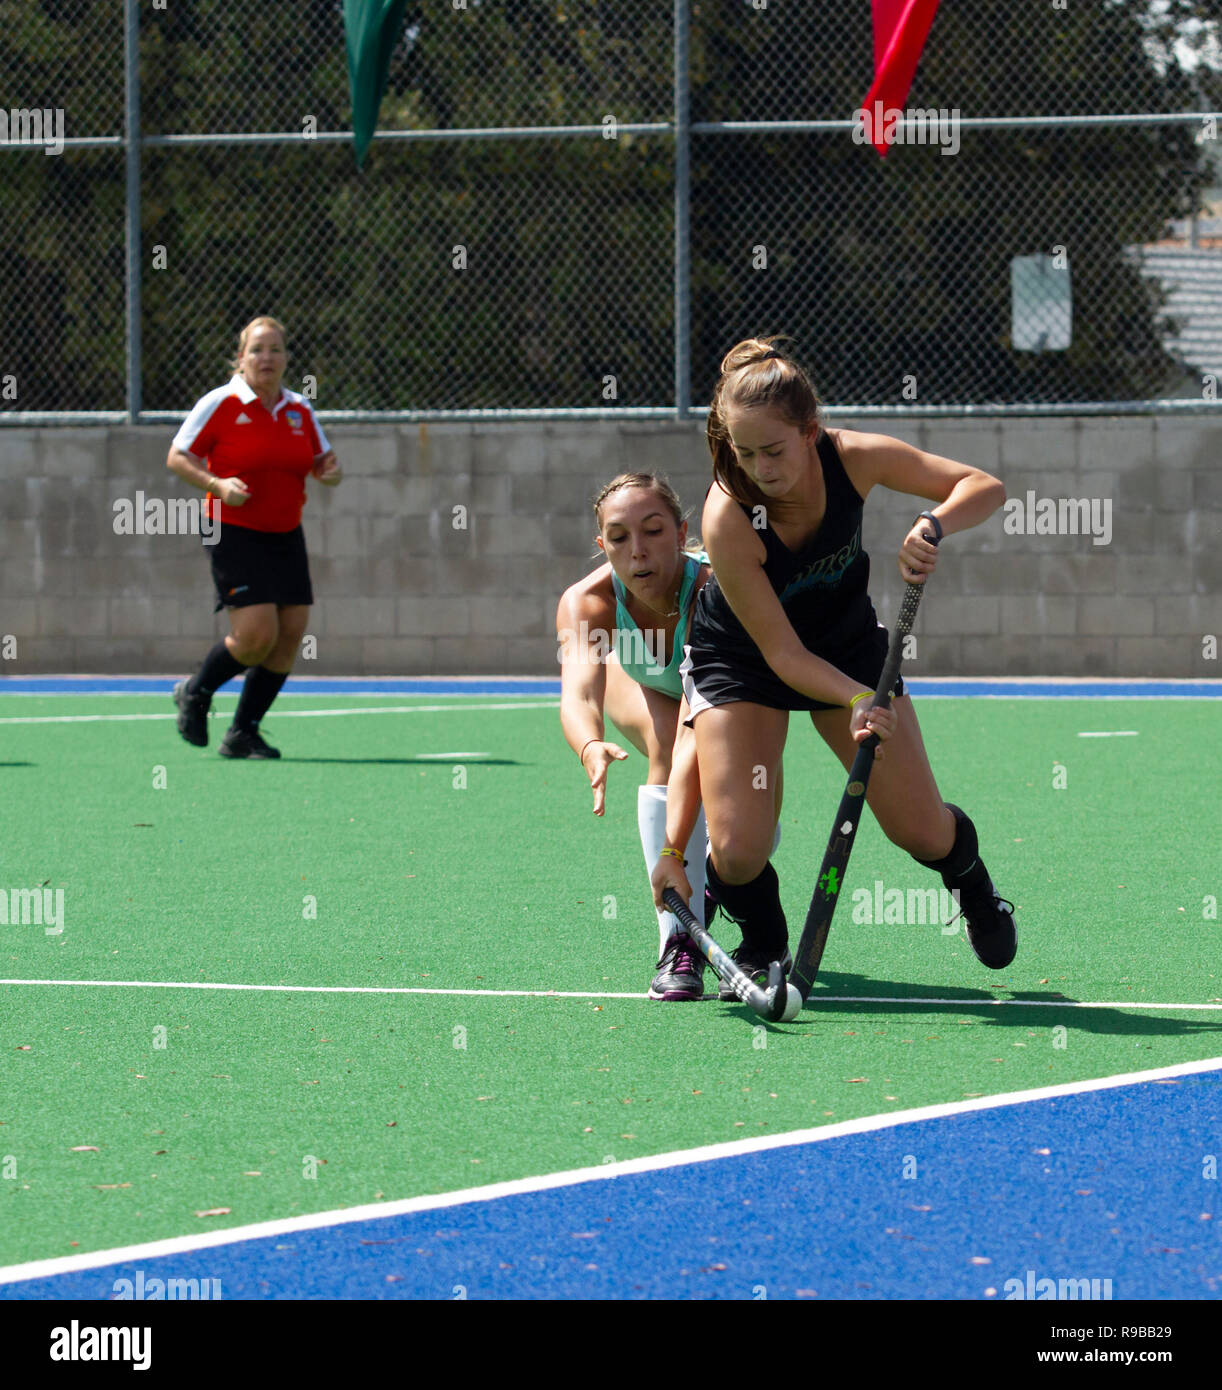 Moorpark, CA - MAY 26: Female field hockey players competing; Northwest vs. Rush'd in the 2018 California Cup, Moorpark College May 26, 2018 Stock Photo